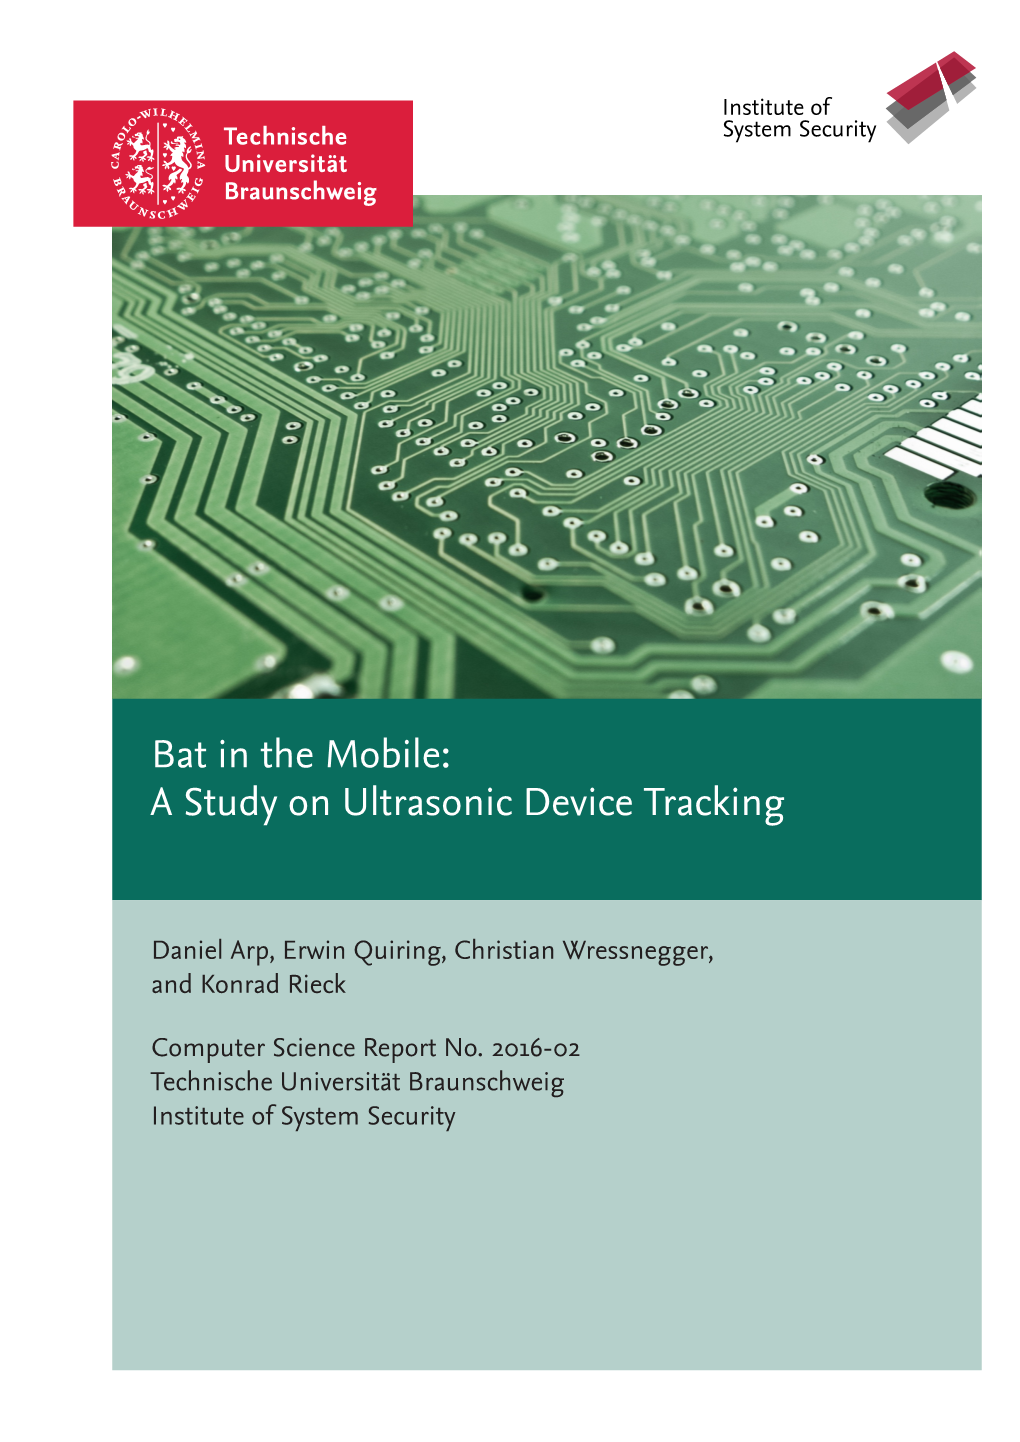 Bat in the Mobile: a Study on Ultrasonic Device Tracking